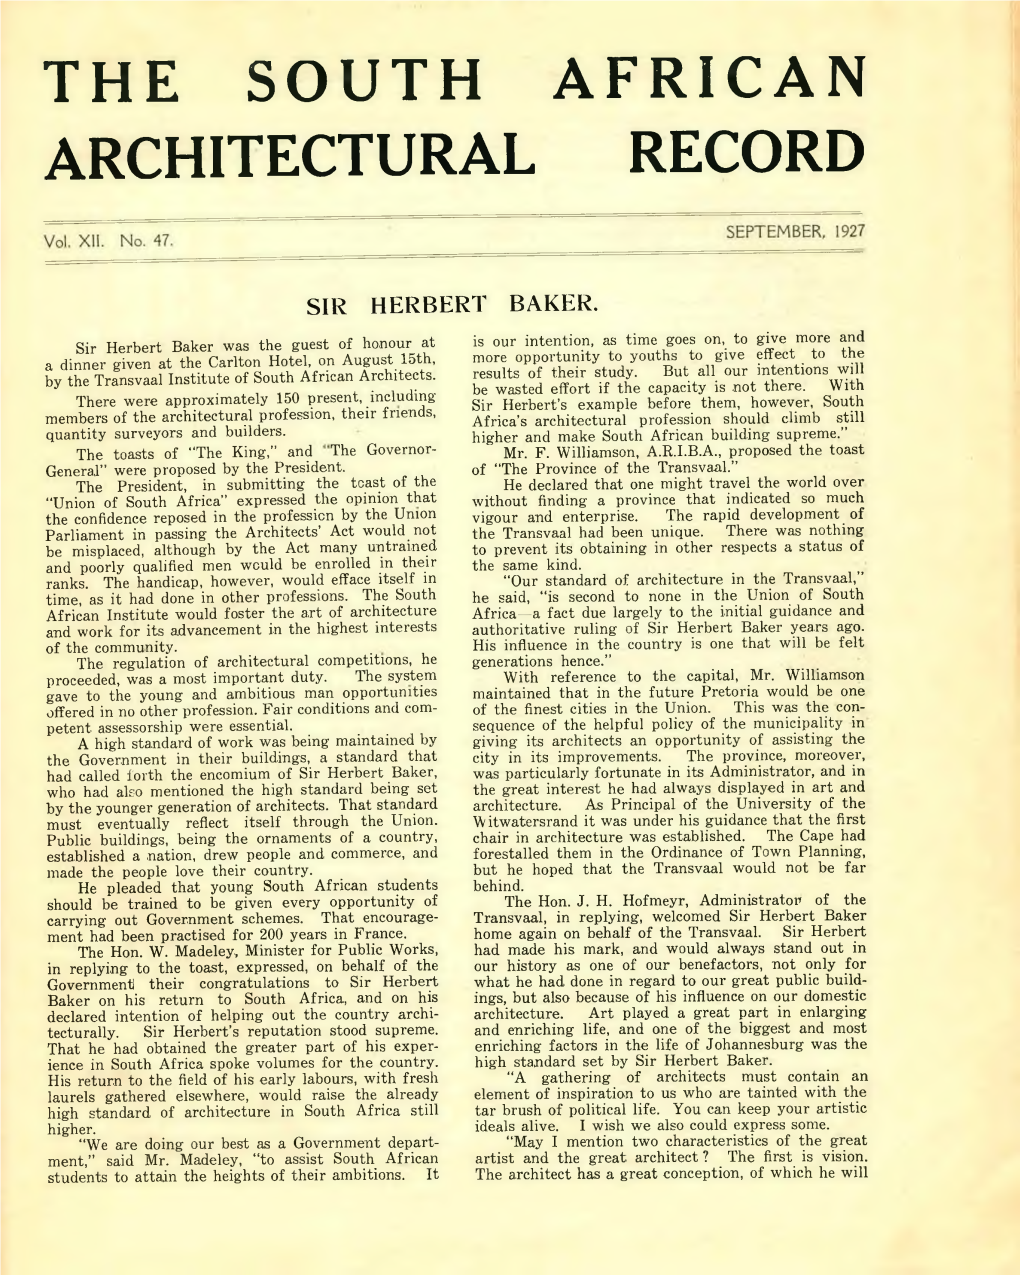 The South African Architectural Record